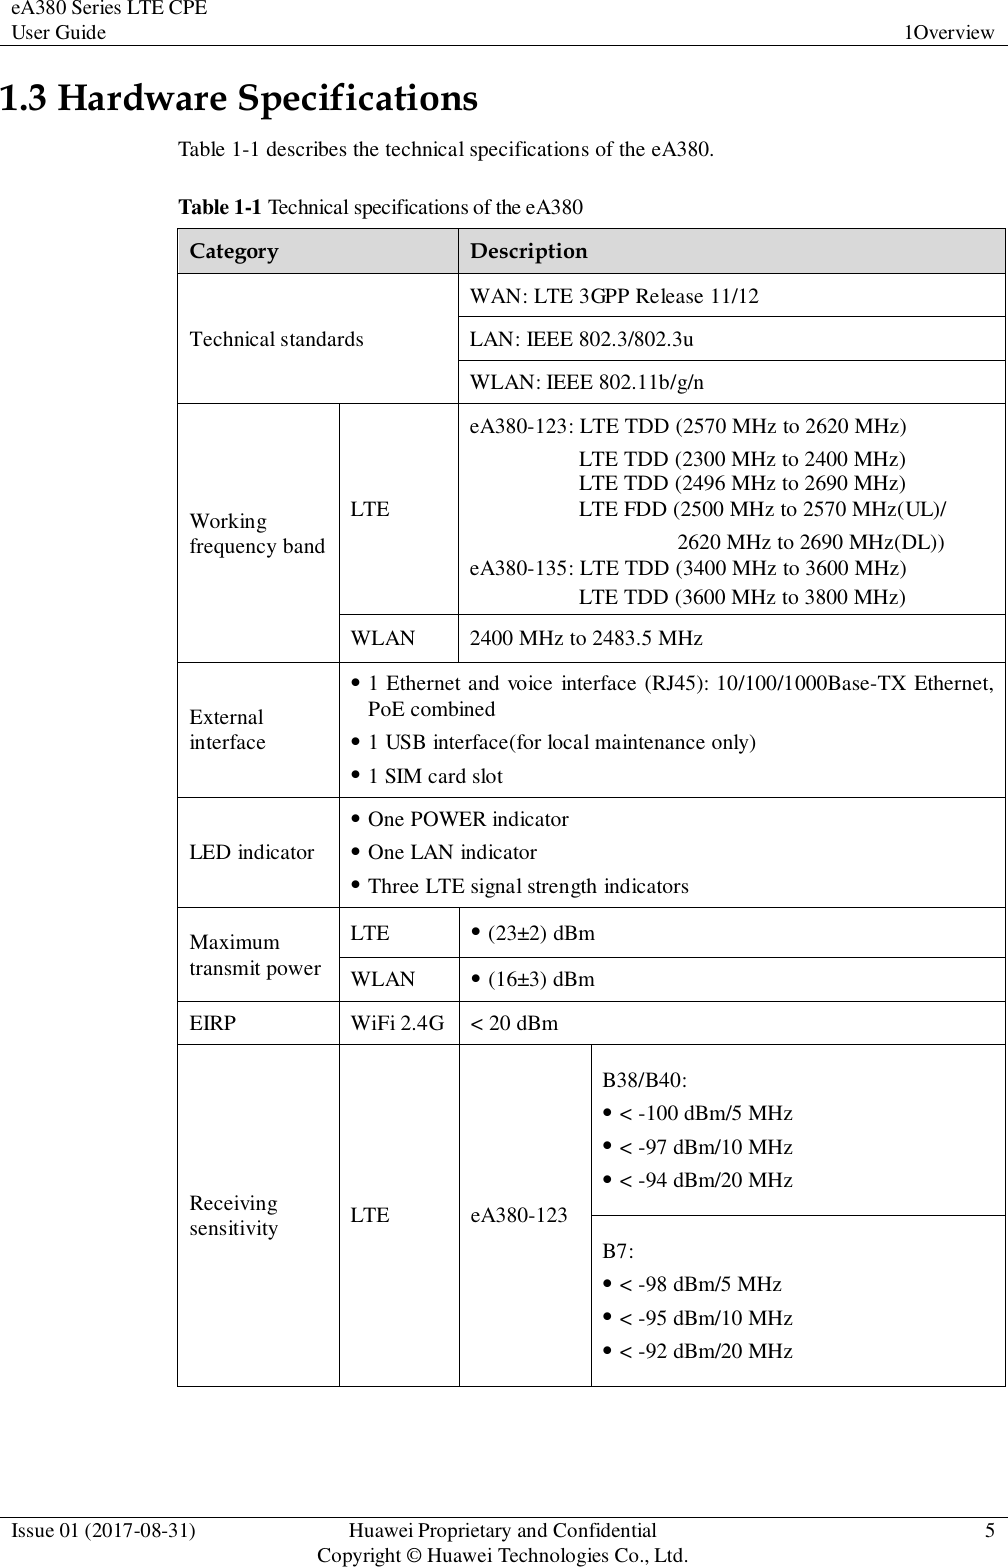 eA380 Series LTE CPE User Guide  1Overview  Issue 01 (2017-08-31)  Huawei Proprietary and Confidential                                     Copyright © Huawei Technologies Co., Ltd.  5  1.3 Hardware Specifications Table 1-1 describes the technical specifications of the eA380. Table 1-1 Technical specifications of the eA380 Category  Description Technical standards WAN: LTE 3GPP Release 11/12 LAN: IEEE 802.3/802.3u WLAN: IEEE 802.11b/g/n Working frequency band LTE eA380-123: LTE TDD (2570 MHz to 2620 MHz) LTE TDD (2300 MHz to 2400 MHz) LTE FDD (2500 MHz to 2570 MHz(UL)/ 2620 MHz to 2690 MHz(DL)) eA380-135: LTE TDD (3400 MHz to 3600 MHz) LTE TDD (3600 MHz to 3800 MHz) WLAN  2400 MHz to 2483.5 MHz External interface  1 Ethernet and voice interface (RJ45): 10/100/1000Base-TX Ethernet, PoE combined  1 USB interface(for local maintenance only)  1 SIM card slot LED indicator  One POWER indicator  One LAN indicator  Three LTE signal strength indicators Maximum transmit power LTE   (23±2) dBm WLAN   (16±3) dBm EIRP  WiFi 2.4G  &lt; 20 dBm Receiving sensitivity  LTE  eA380-123 B38/B40:  &lt; -100 dBm/5 MHz  &lt; -97 dBm/10 MHz  &lt; -94 dBm/20 MHz B7:  &lt; -98 dBm/5 MHz  &lt; -95 dBm/10 MHz  &lt; -92 dBm/20 MHz LTE TDD (2496 MHz to 2690 MHz)